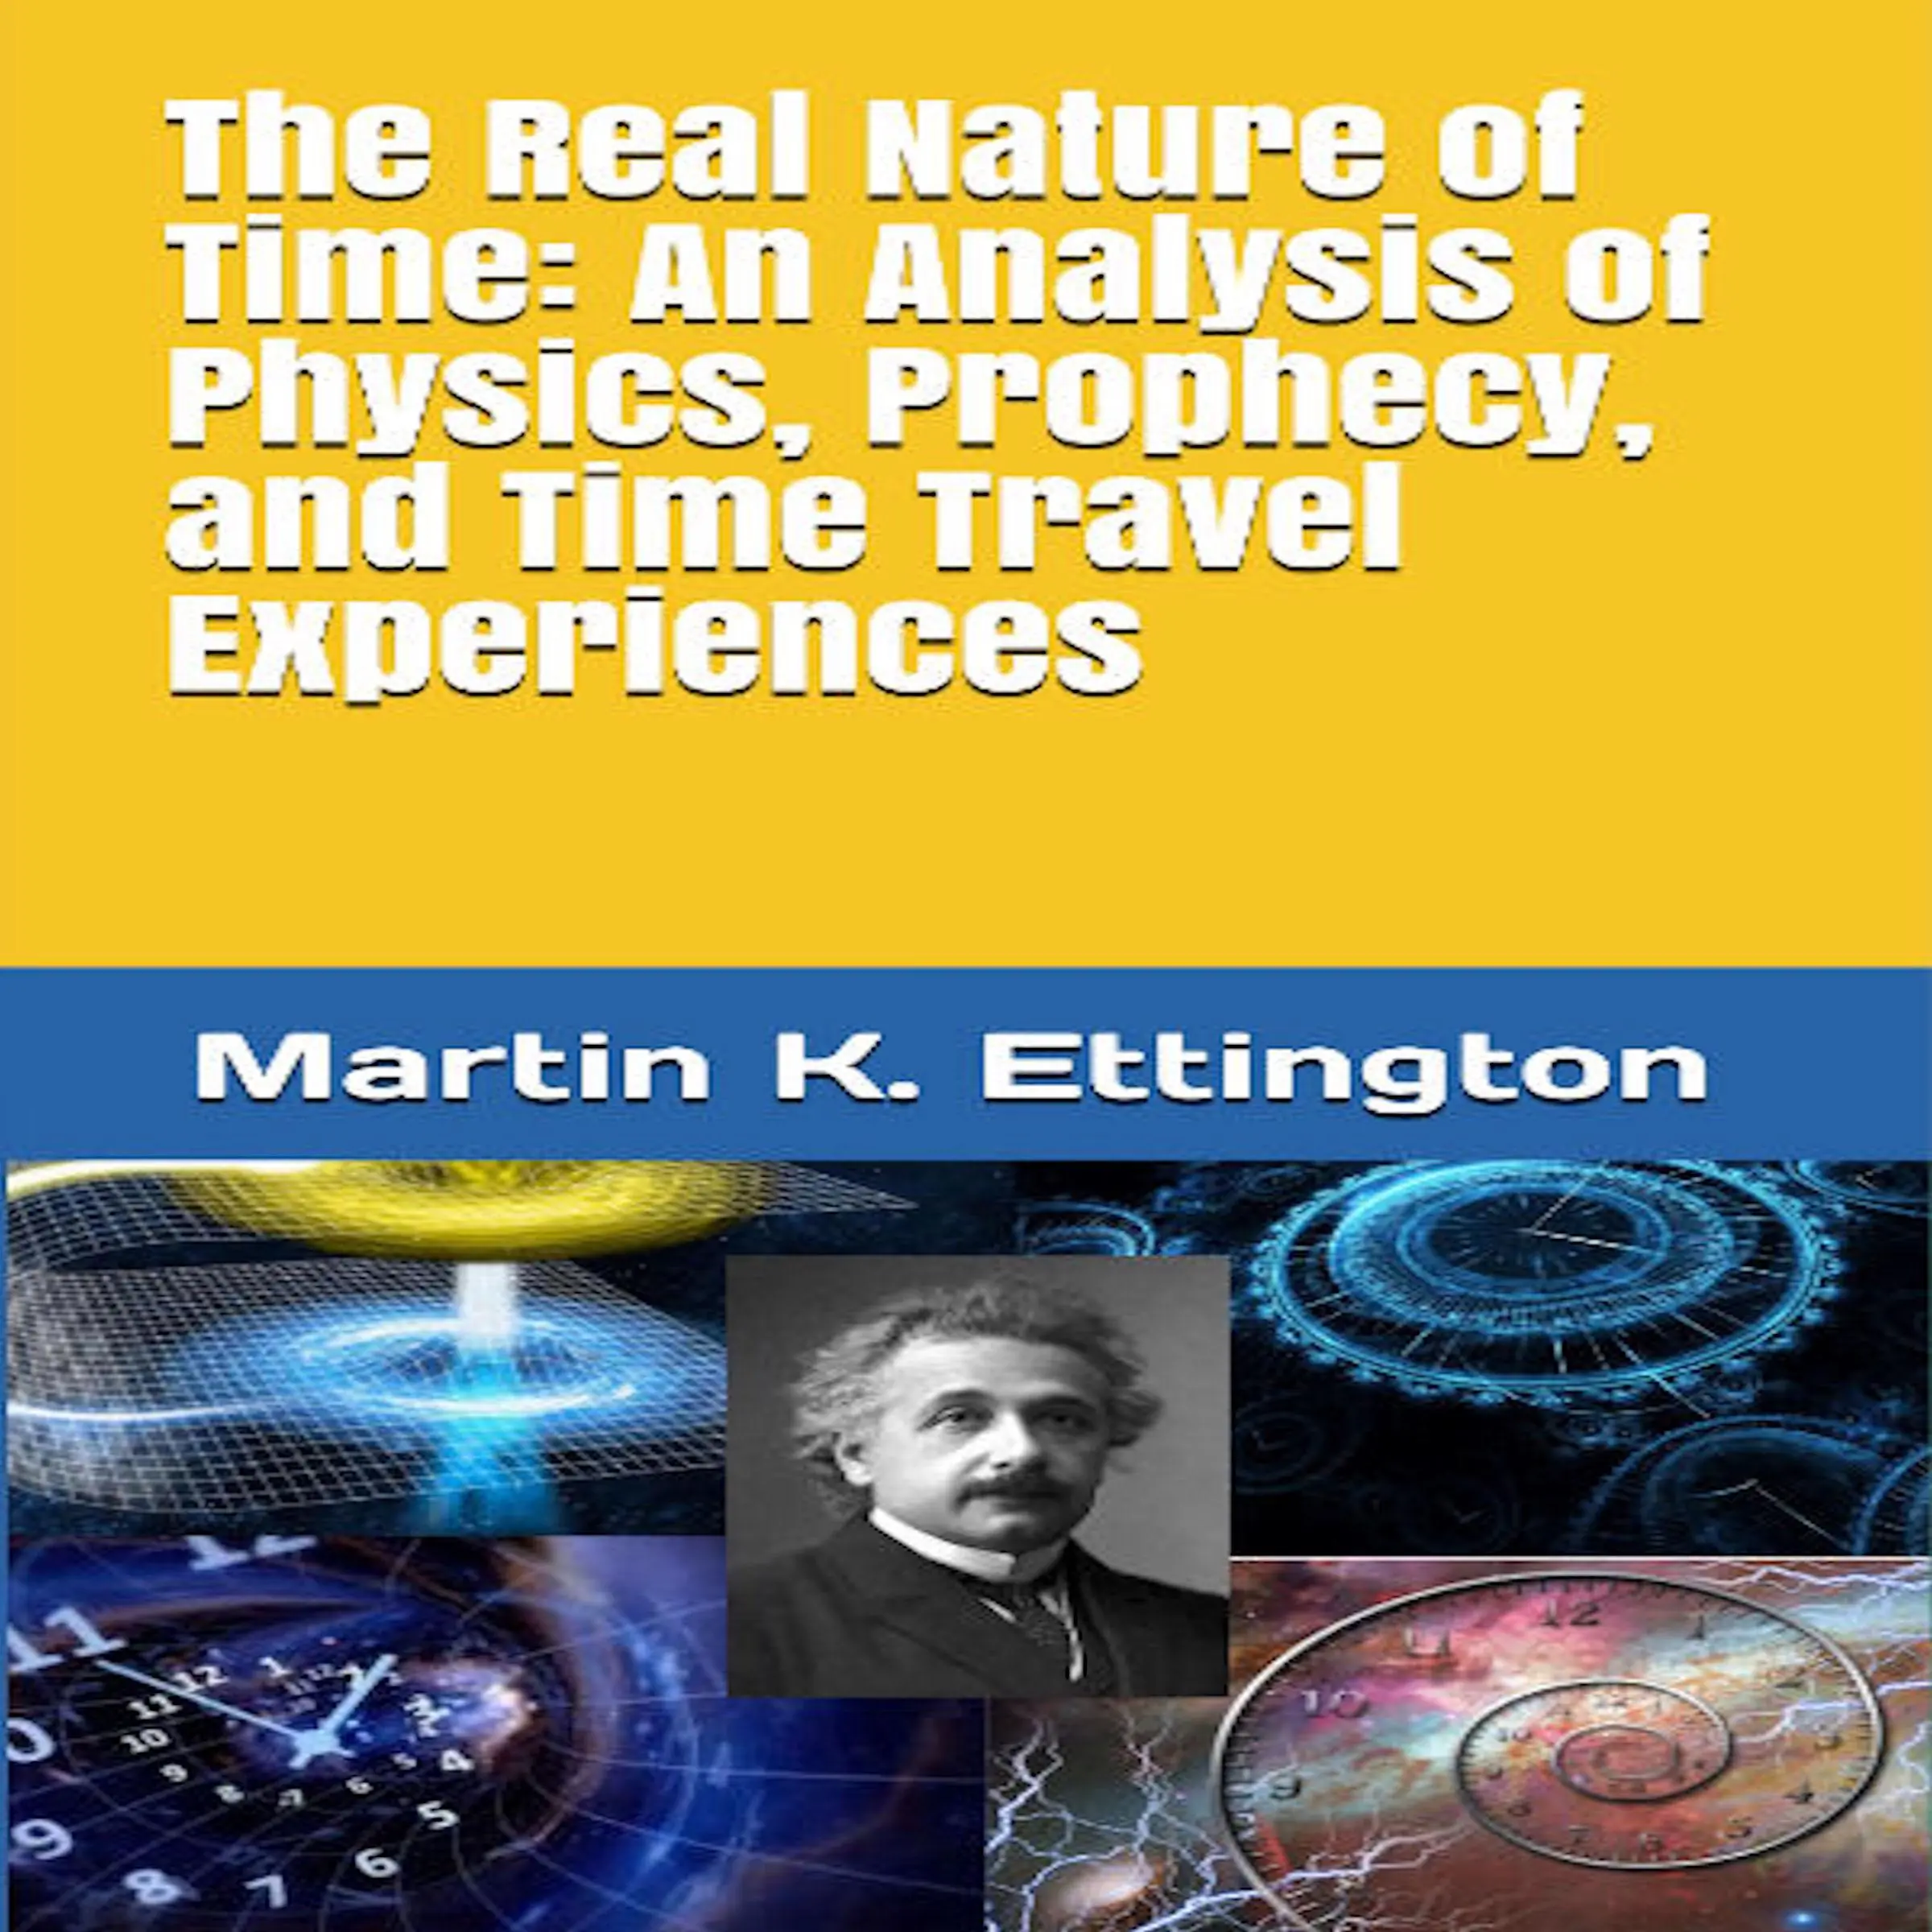 The Real Nature of Time: An Analysis of Physics, Prophecy, and Time Travel Experiences Audiobook by Martin K. Ettington